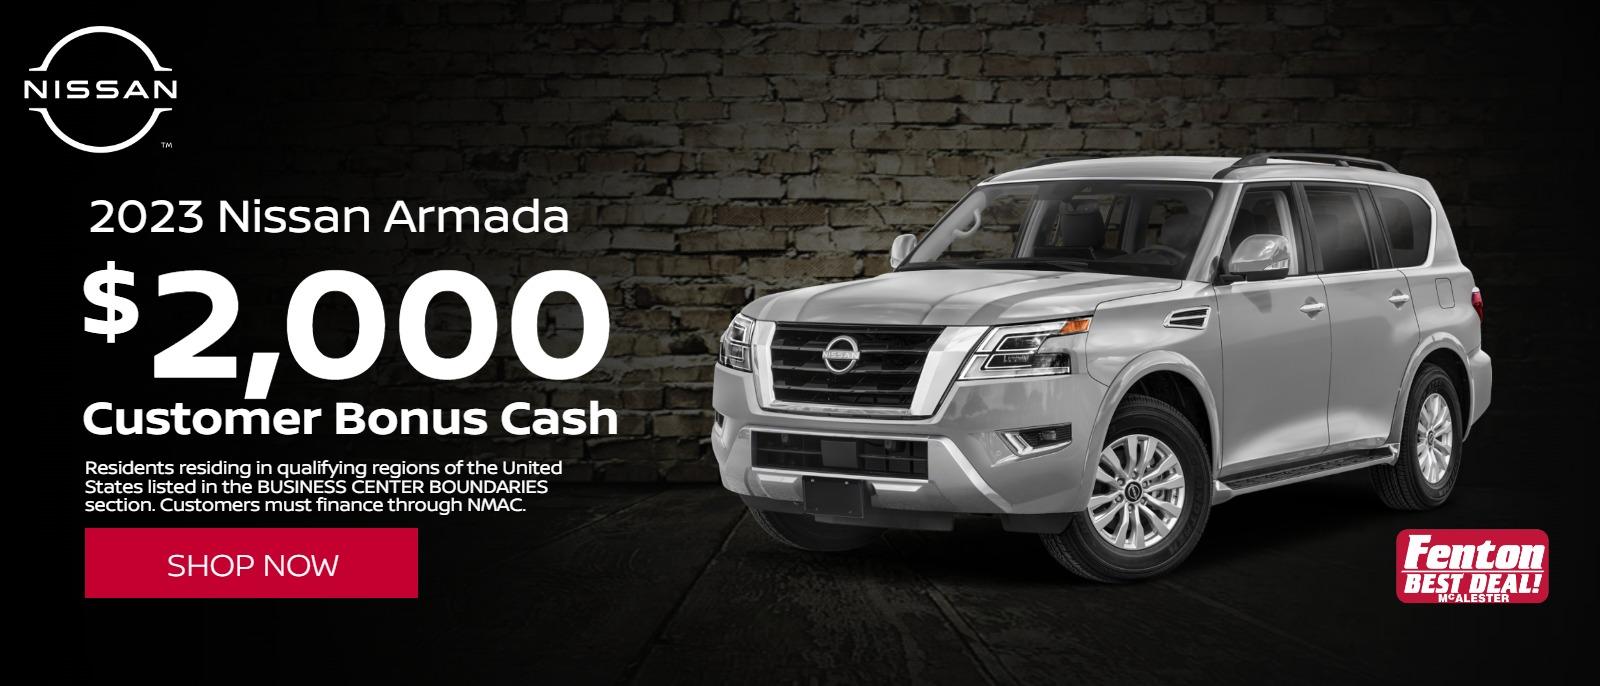 2023 Nissan Armada
$2000 Customer Bonus Cash
*Residents residing in qualifying regions of the United States listed in the BUSINESS CENTER BOUNDARIES section. Customers must finance through NMAC.